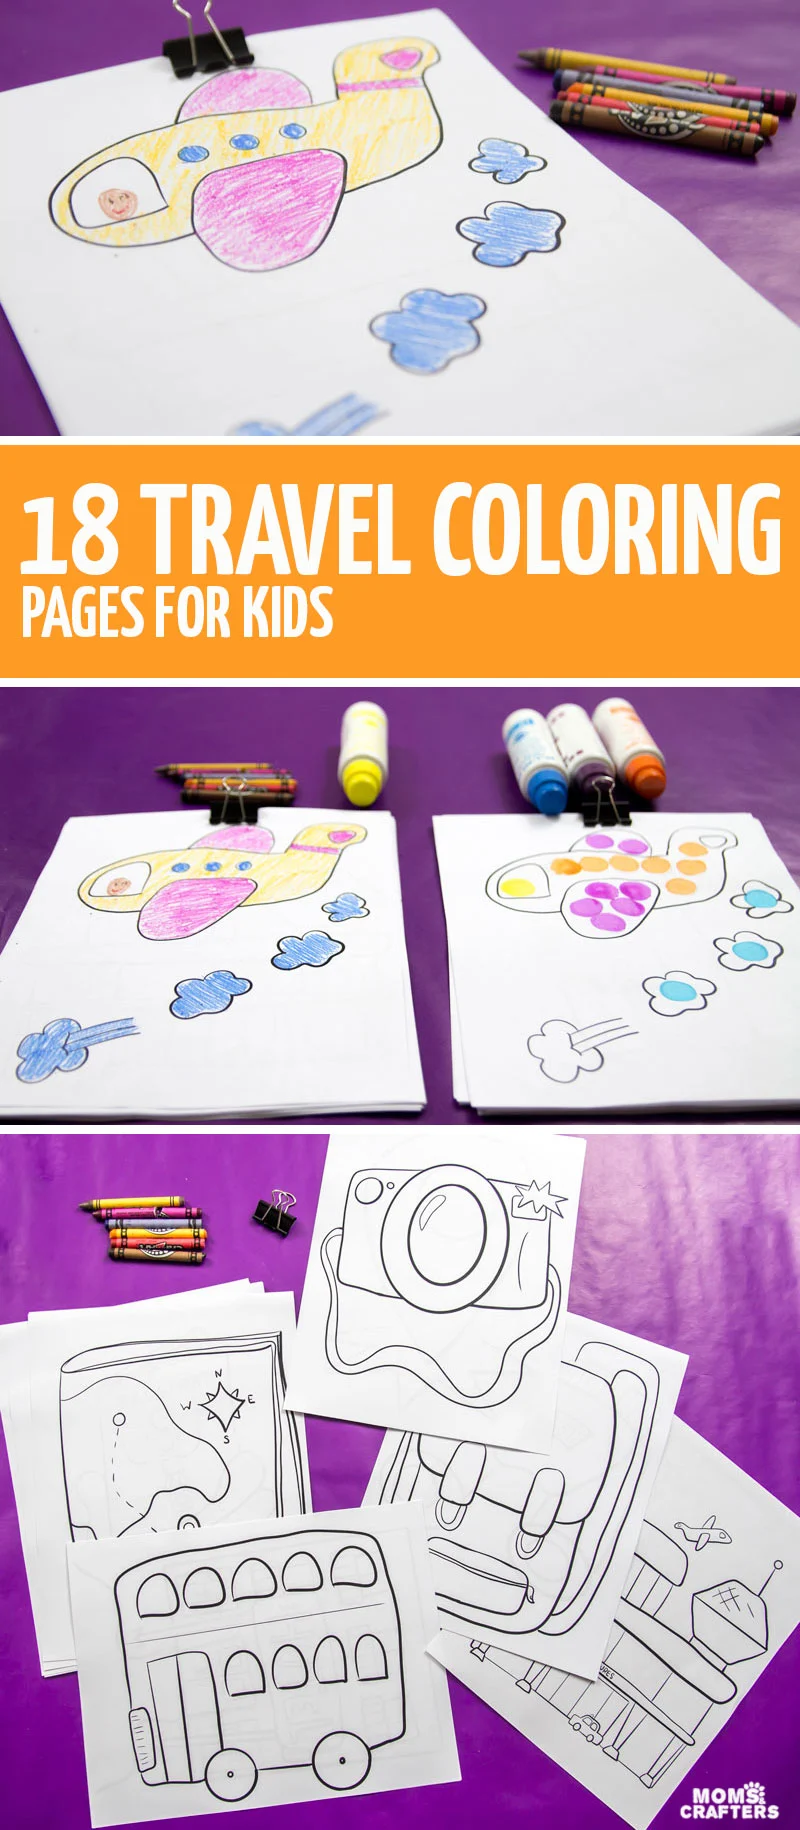 Click to check out this cool bundle of traveling coloring pages for kids - the perfect travel activities for toddlers and preschoolers to do on the airplane - and great plane travel activity binder fillers!